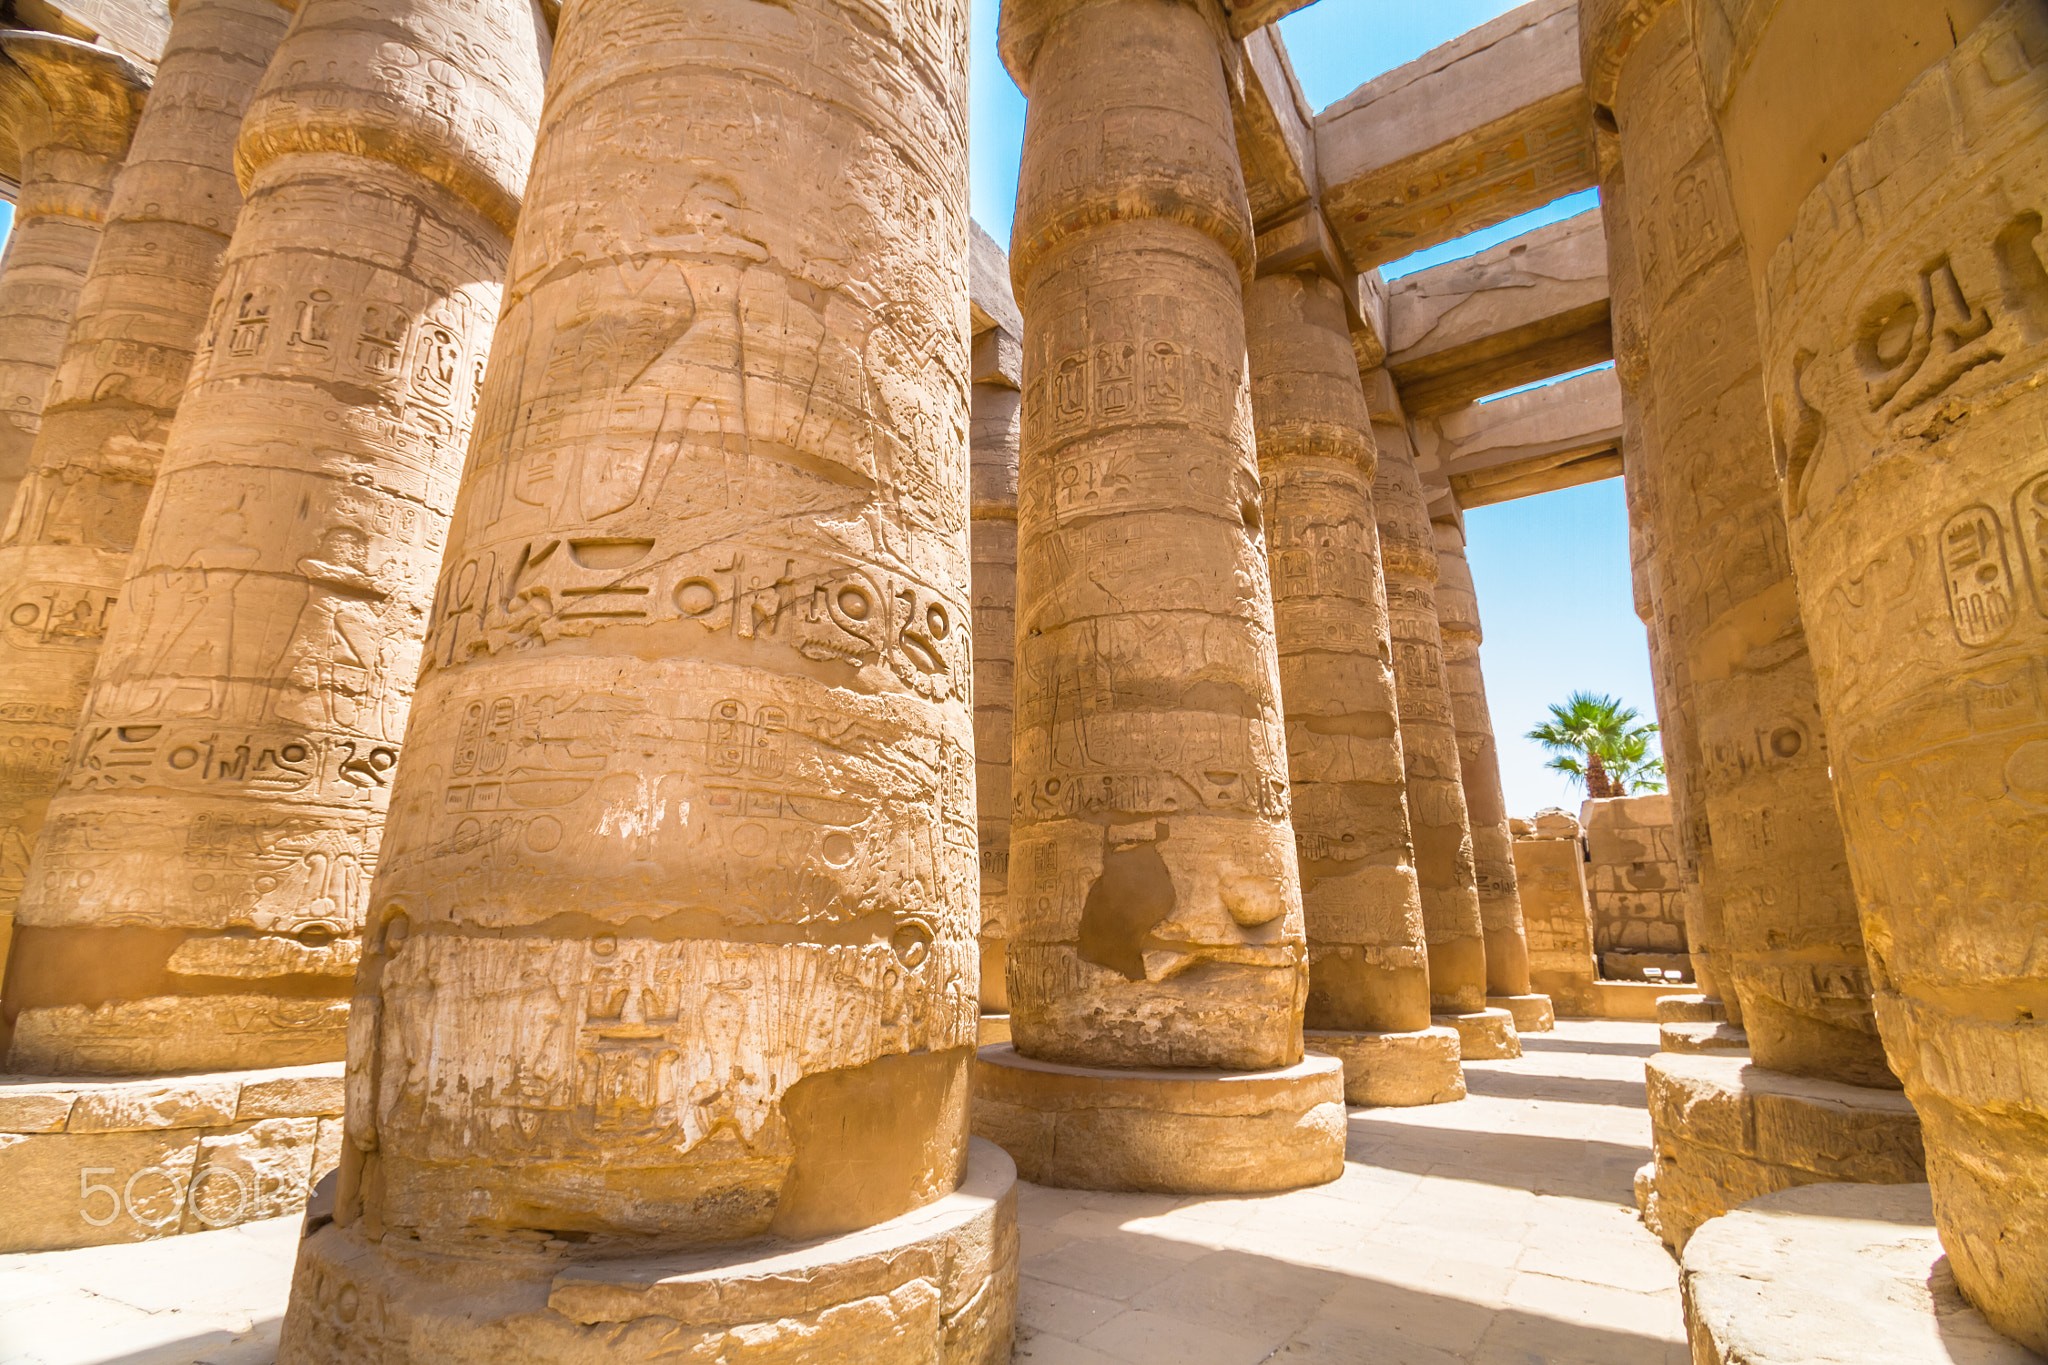 Luxor Day Tours and Excursions